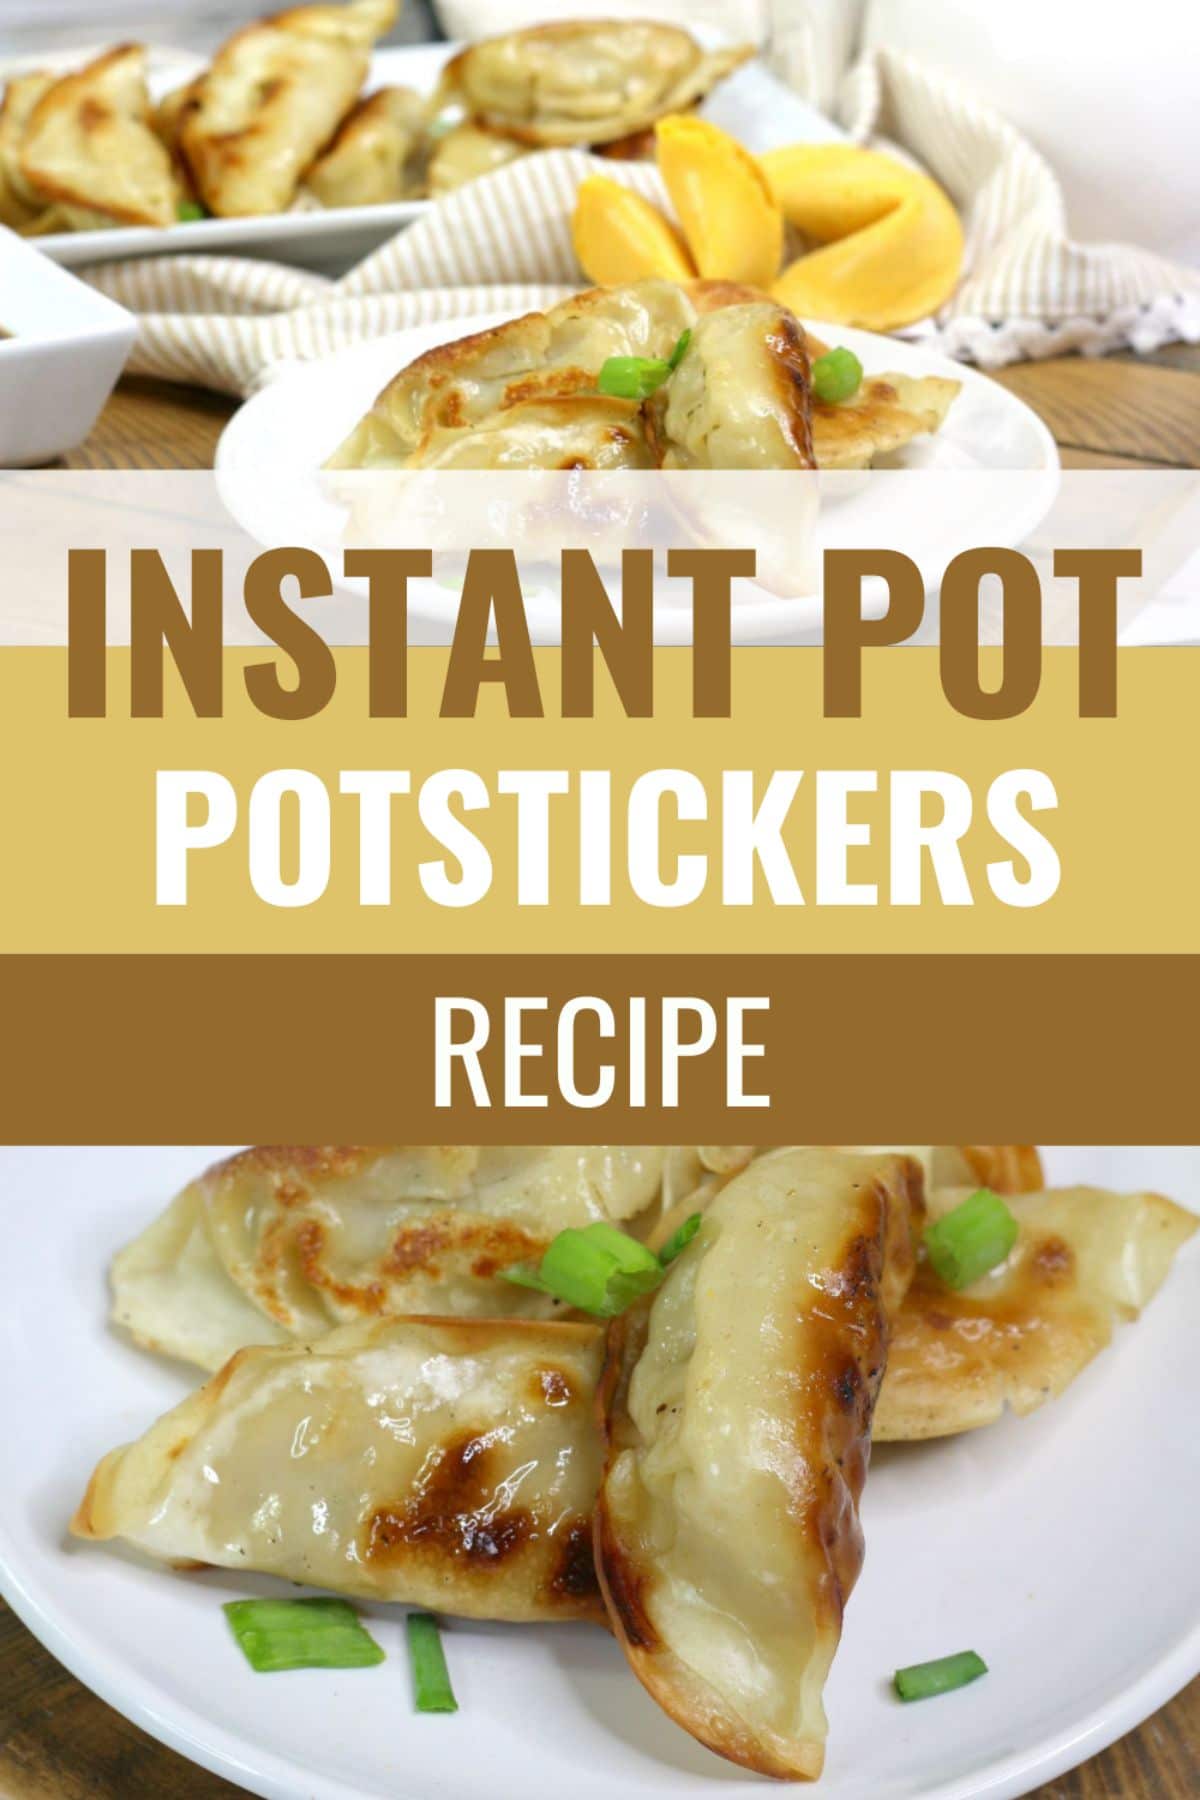 A collage of 2 images of Instant Pot Potstickers separated by a large text saying "Instant Pot Potstickers Recipe"